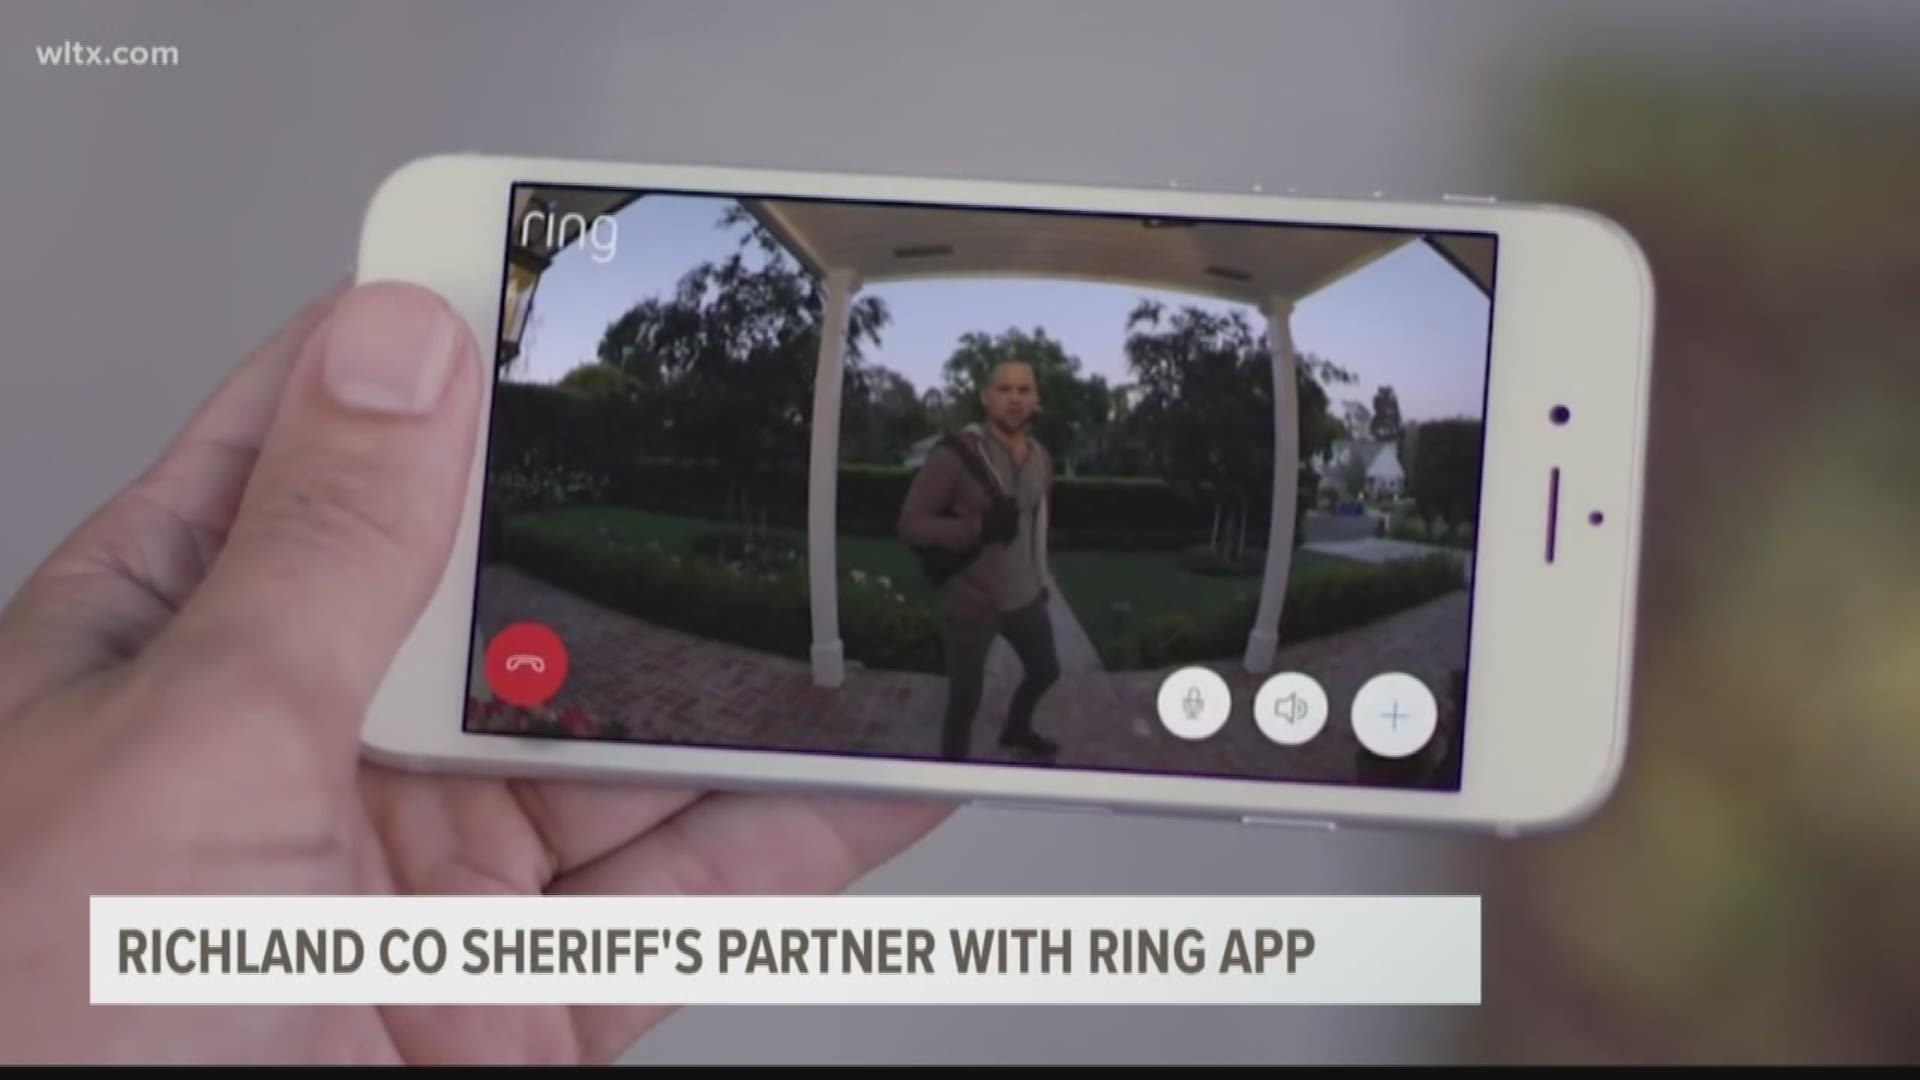 The Richland County Sheriff's Department is on board. They have partnered with the neighbors app by Ring to keep track of crimes happening in neighborhoods.